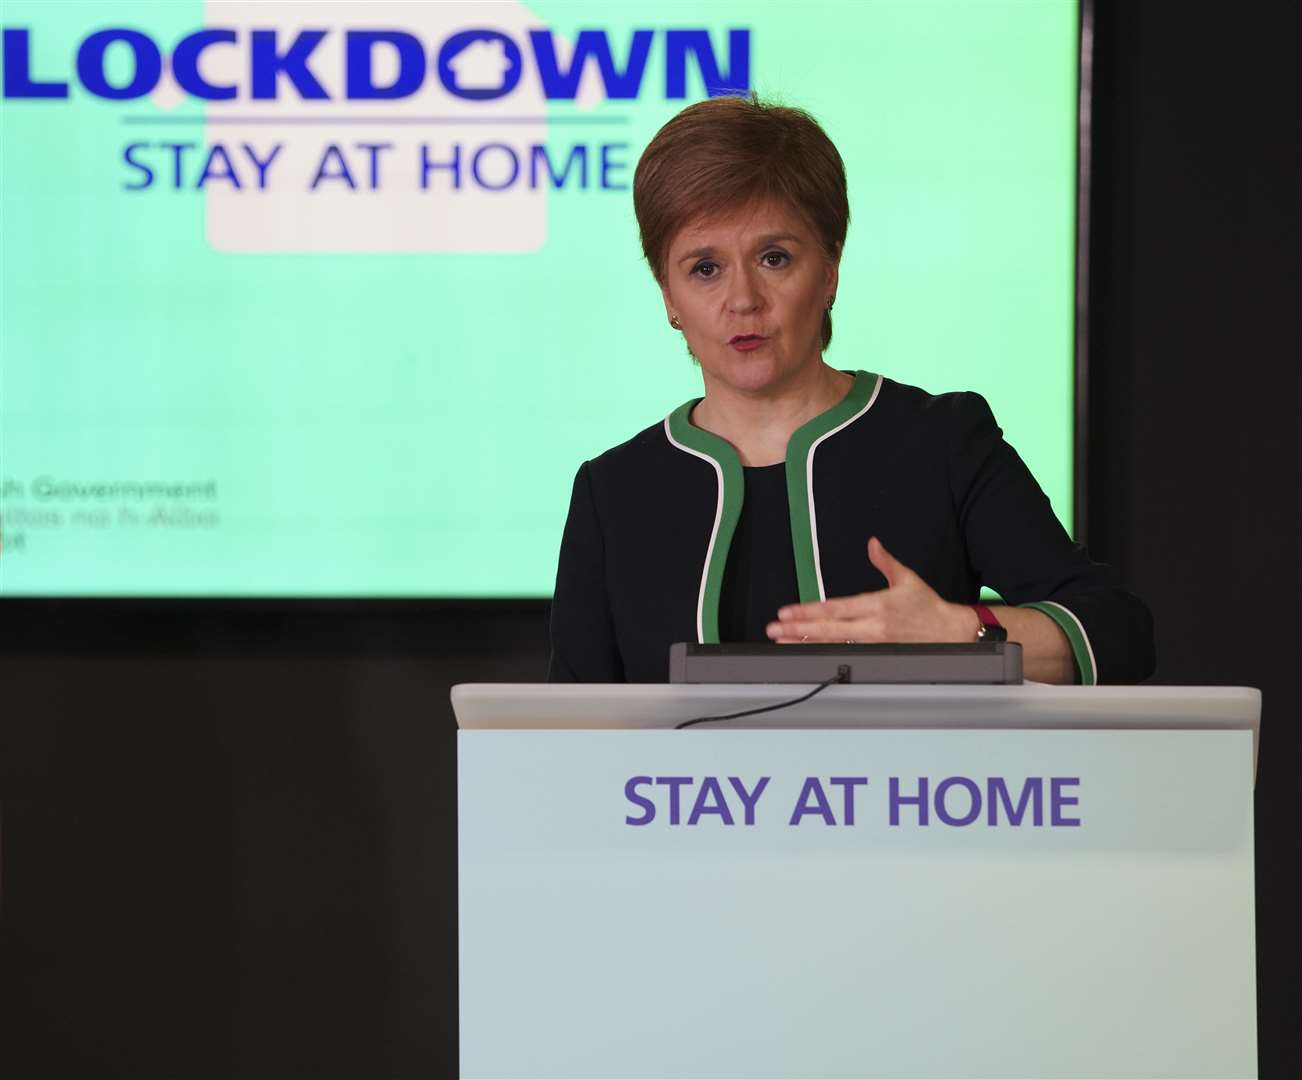 Nicola Sturgeon at her briefing on Monday. She said in parliament today that the lockdown restrictions are beginning to have an impact but 'it is important to be cautious'.